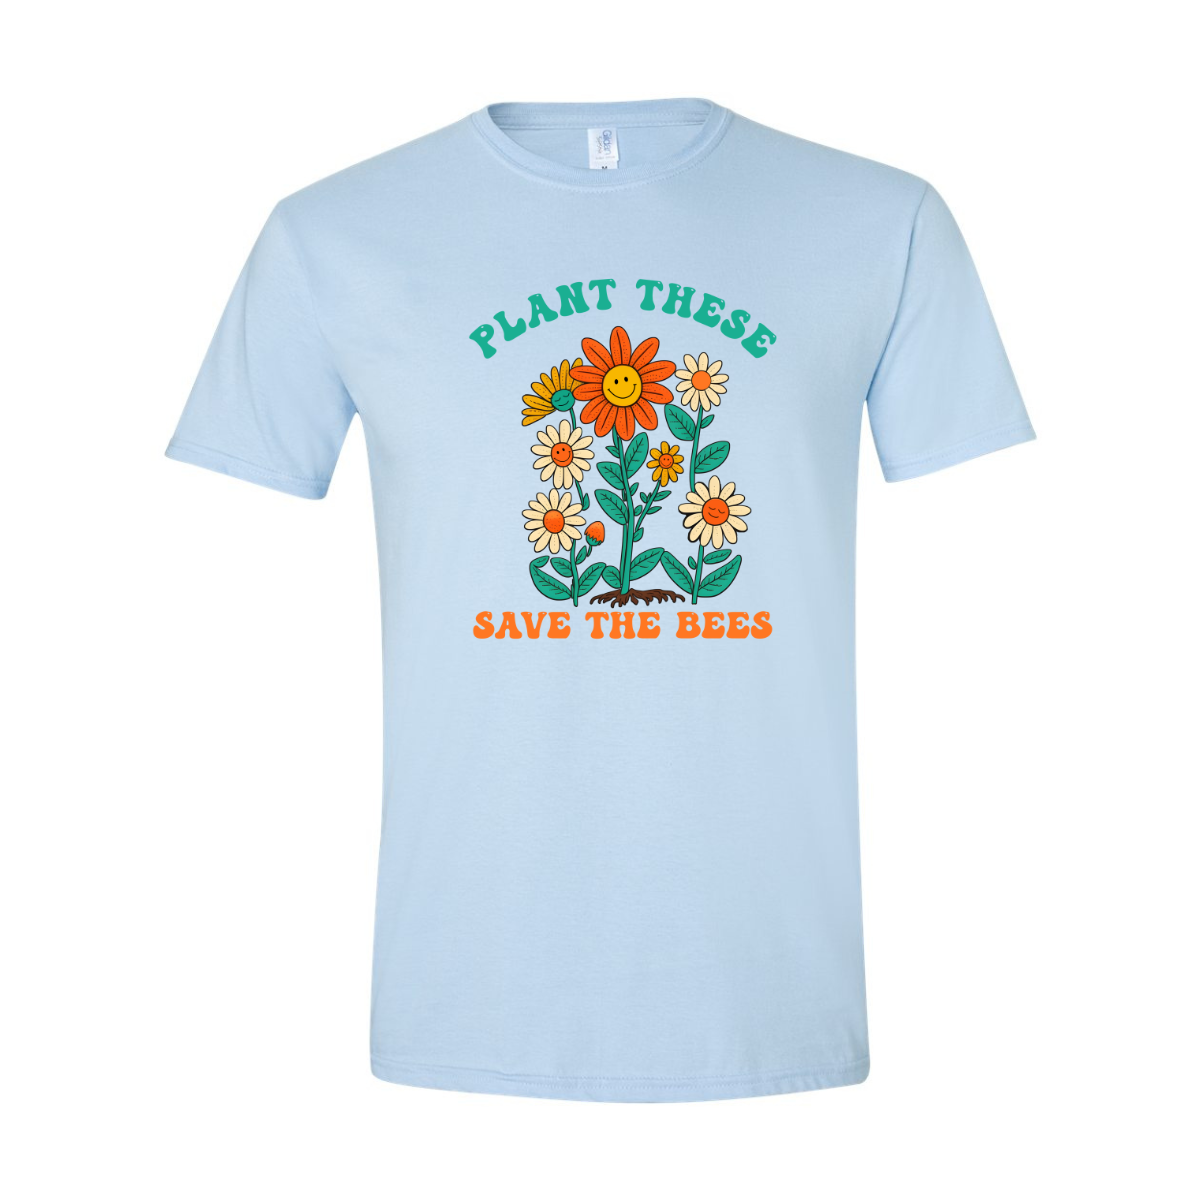 ADULT Unisex T-Shirt EDAA017 PLANT THESE SAVE THE BEES